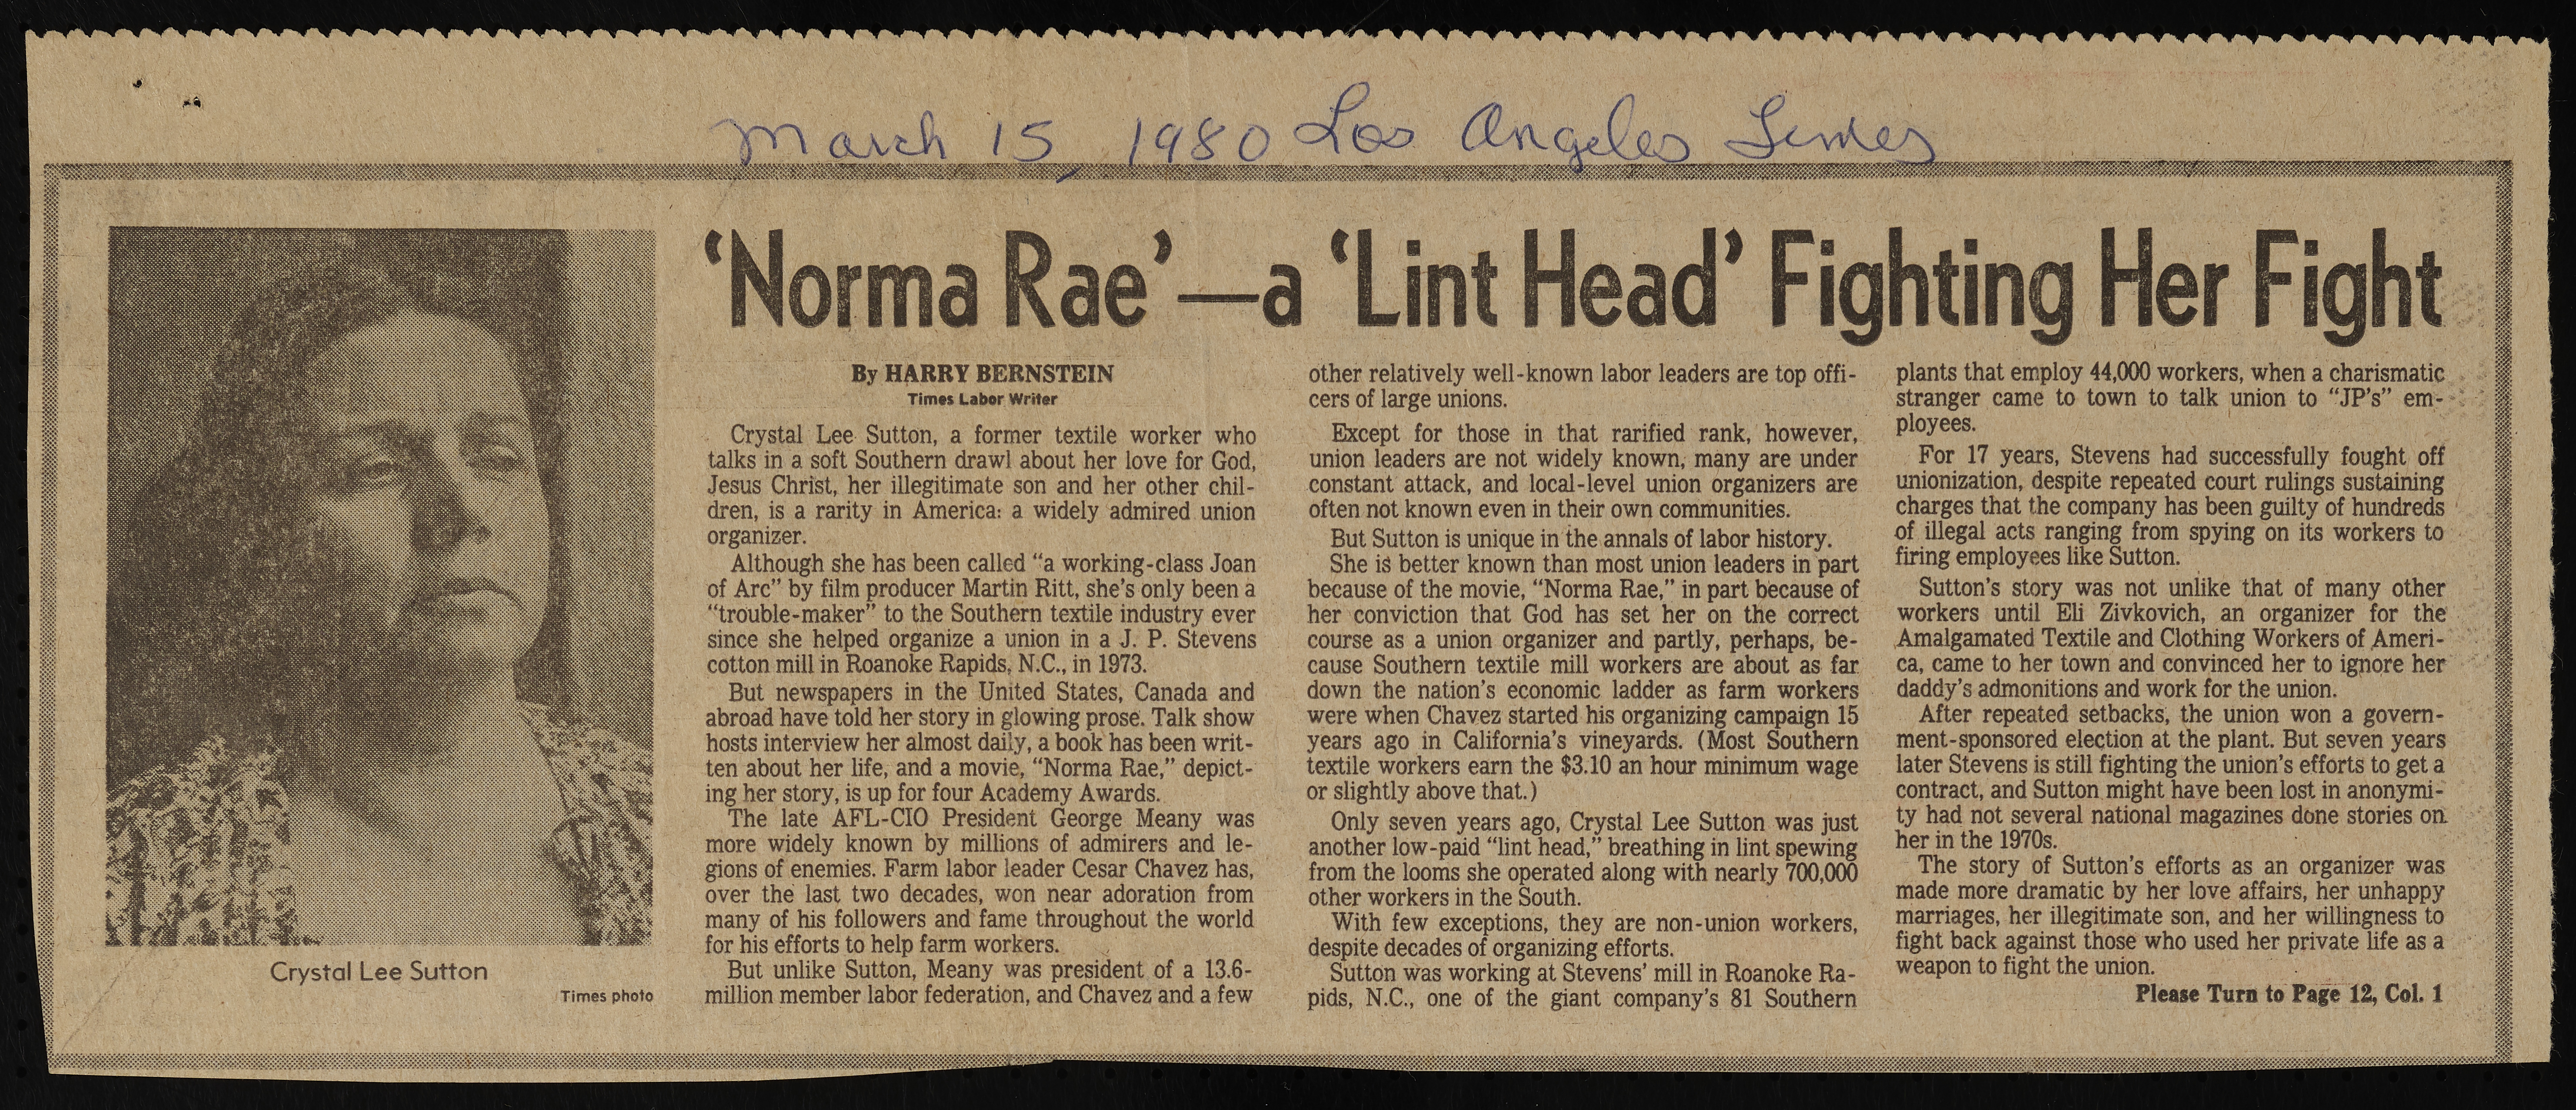 Norma Rae' - A 'Lint Head' Fighting Her Fight